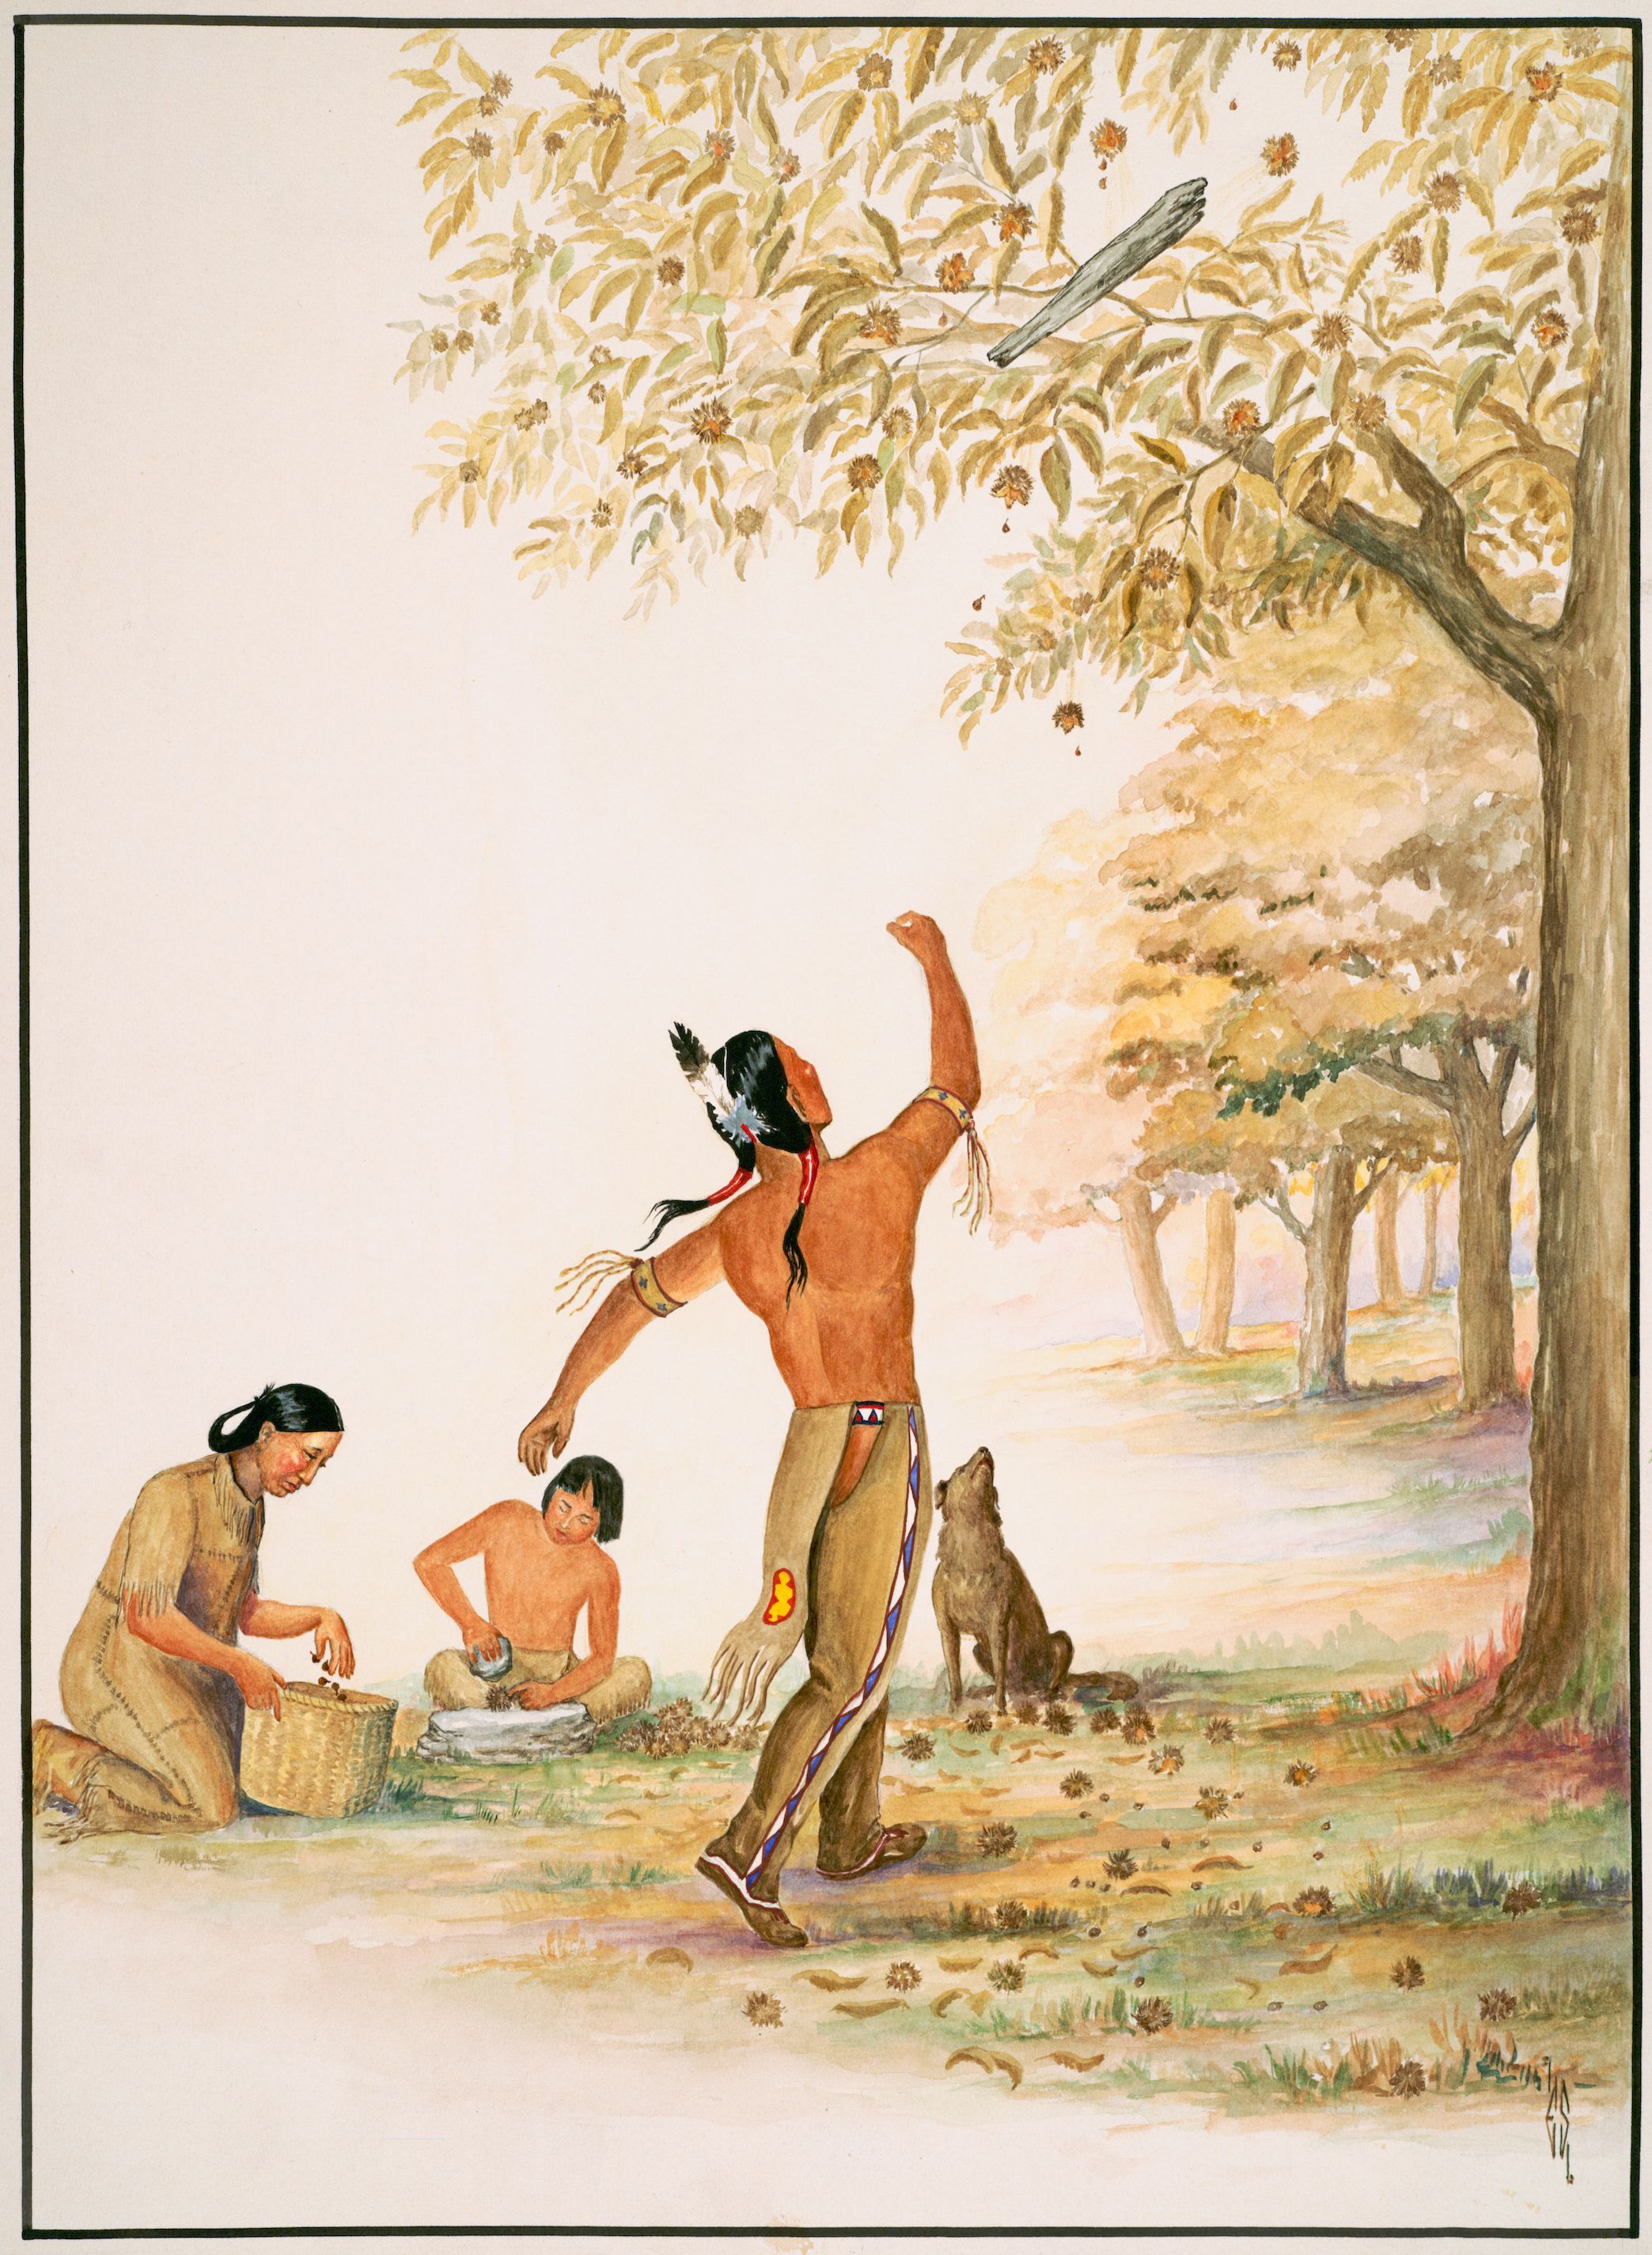 A painting of a man throwing a club into an American chestnut tree while two people kneel nearby